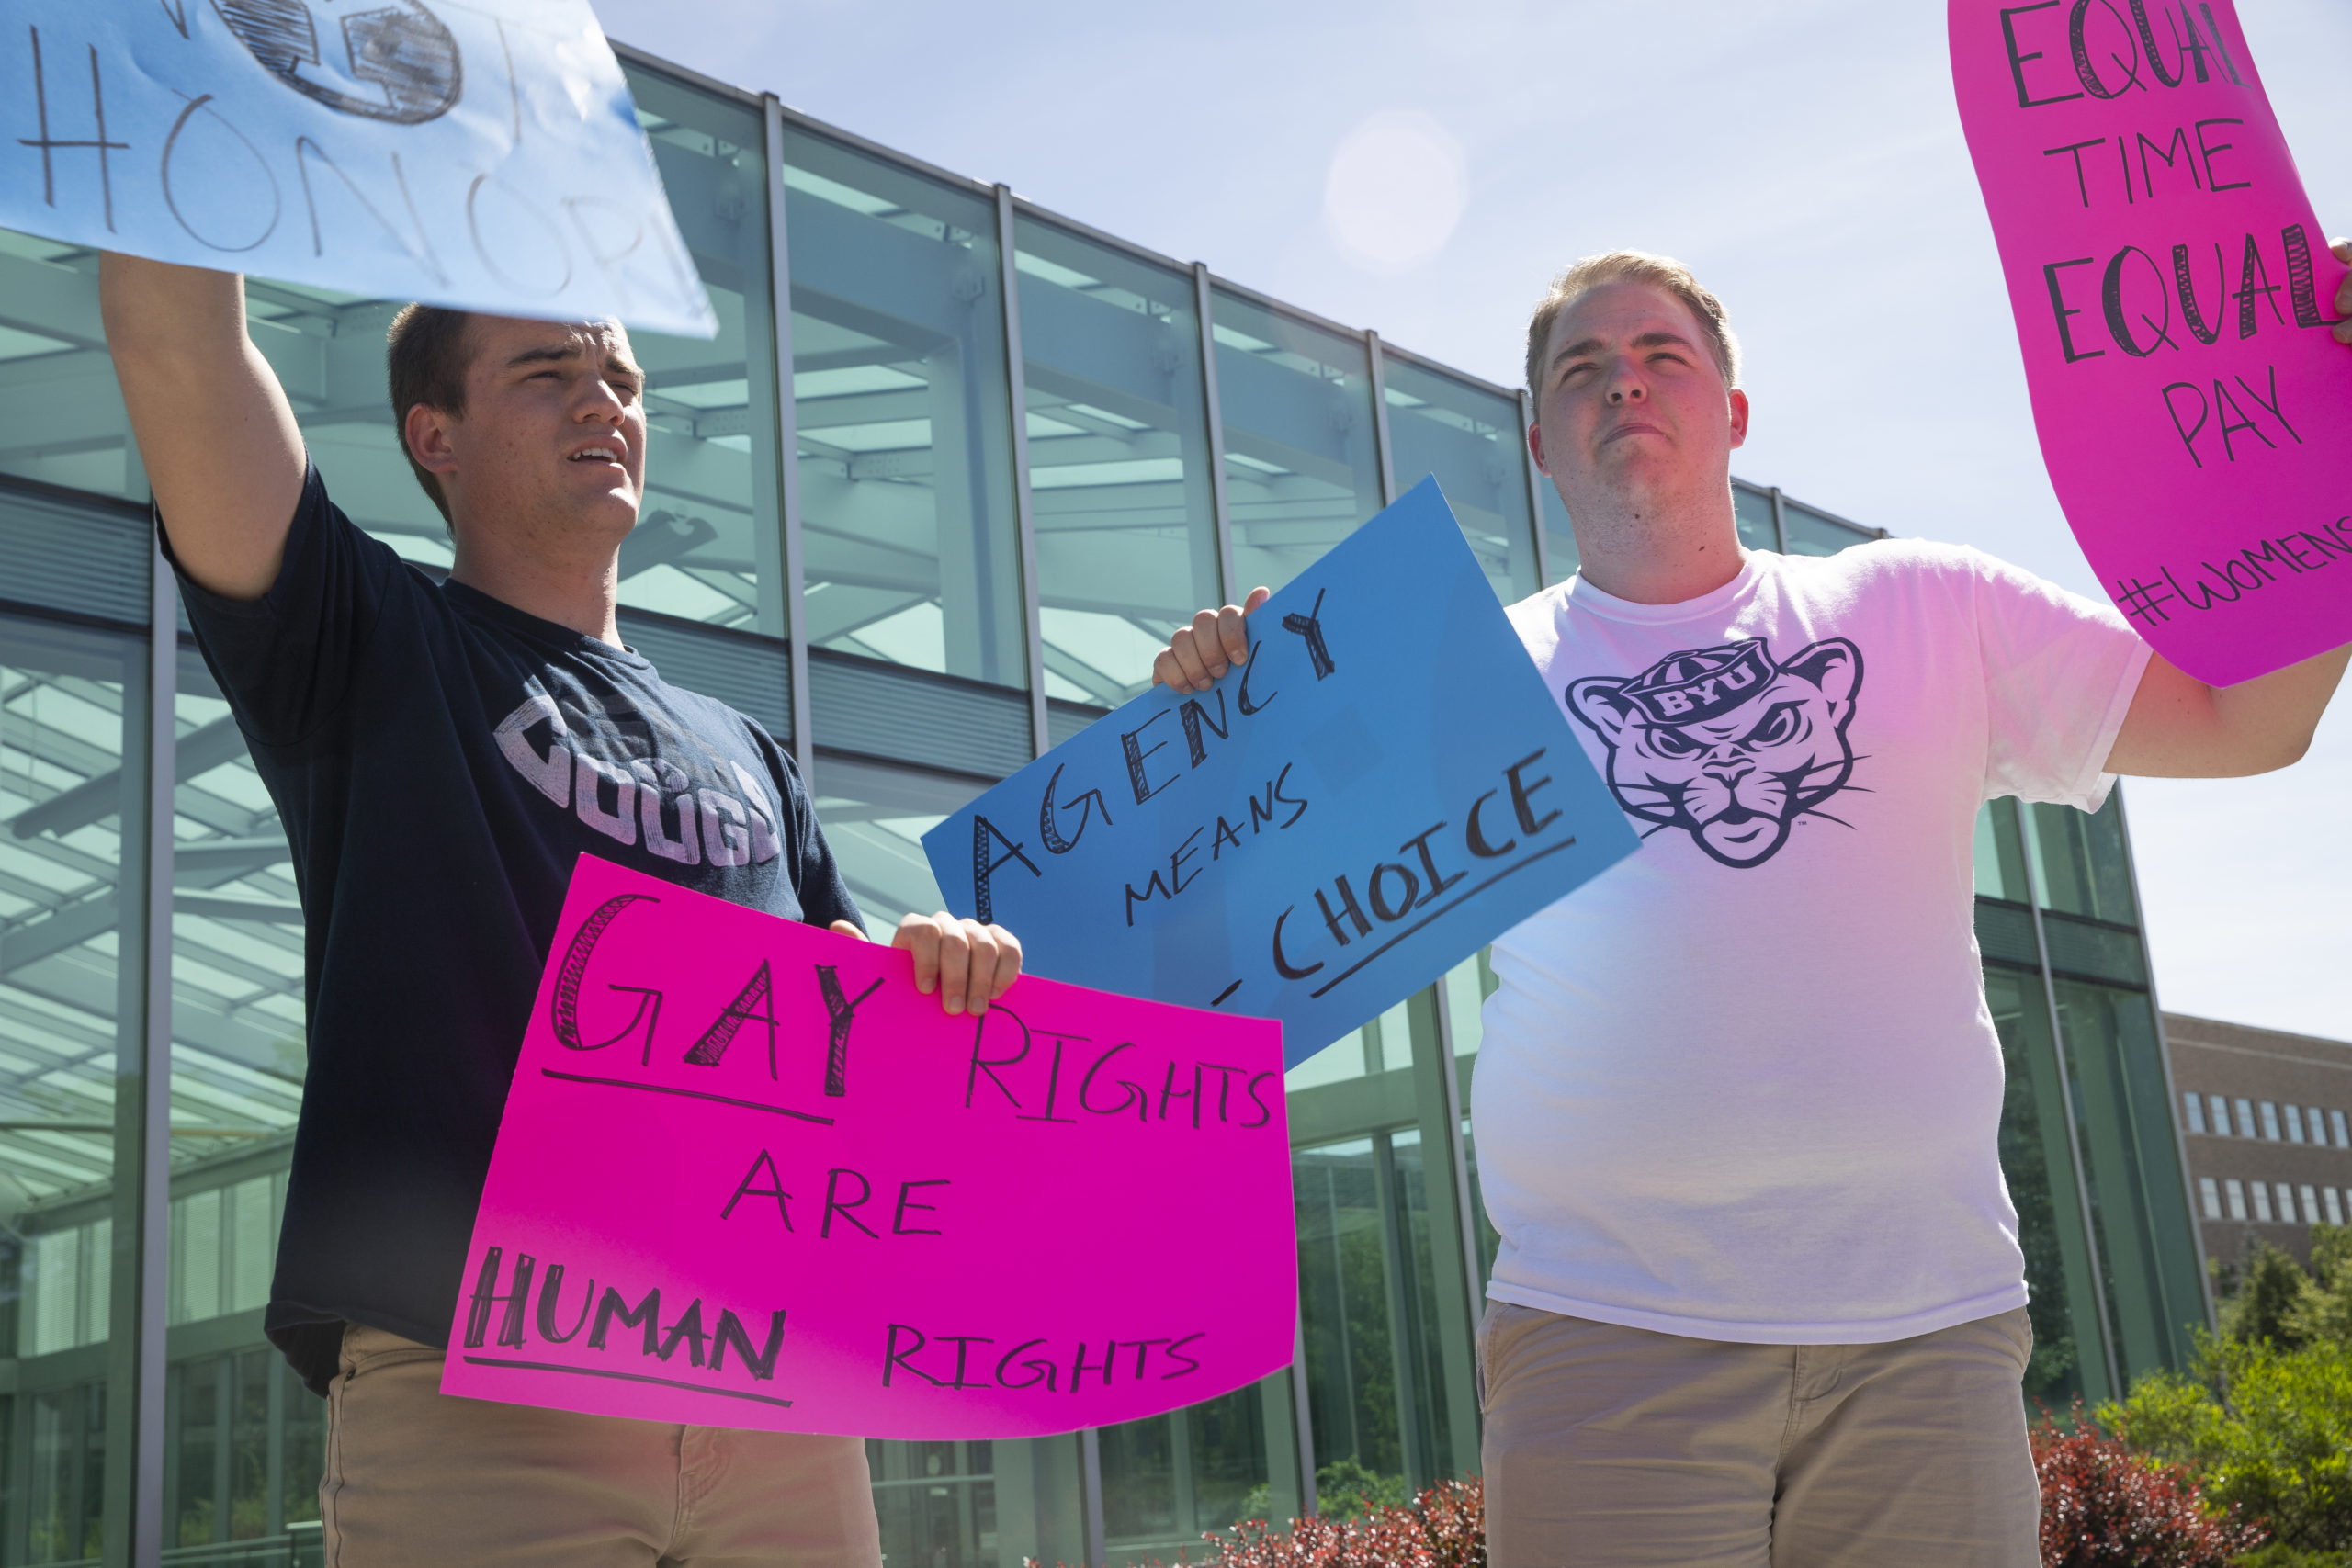 Cultural norms may hinder BYU students from voicing political ...